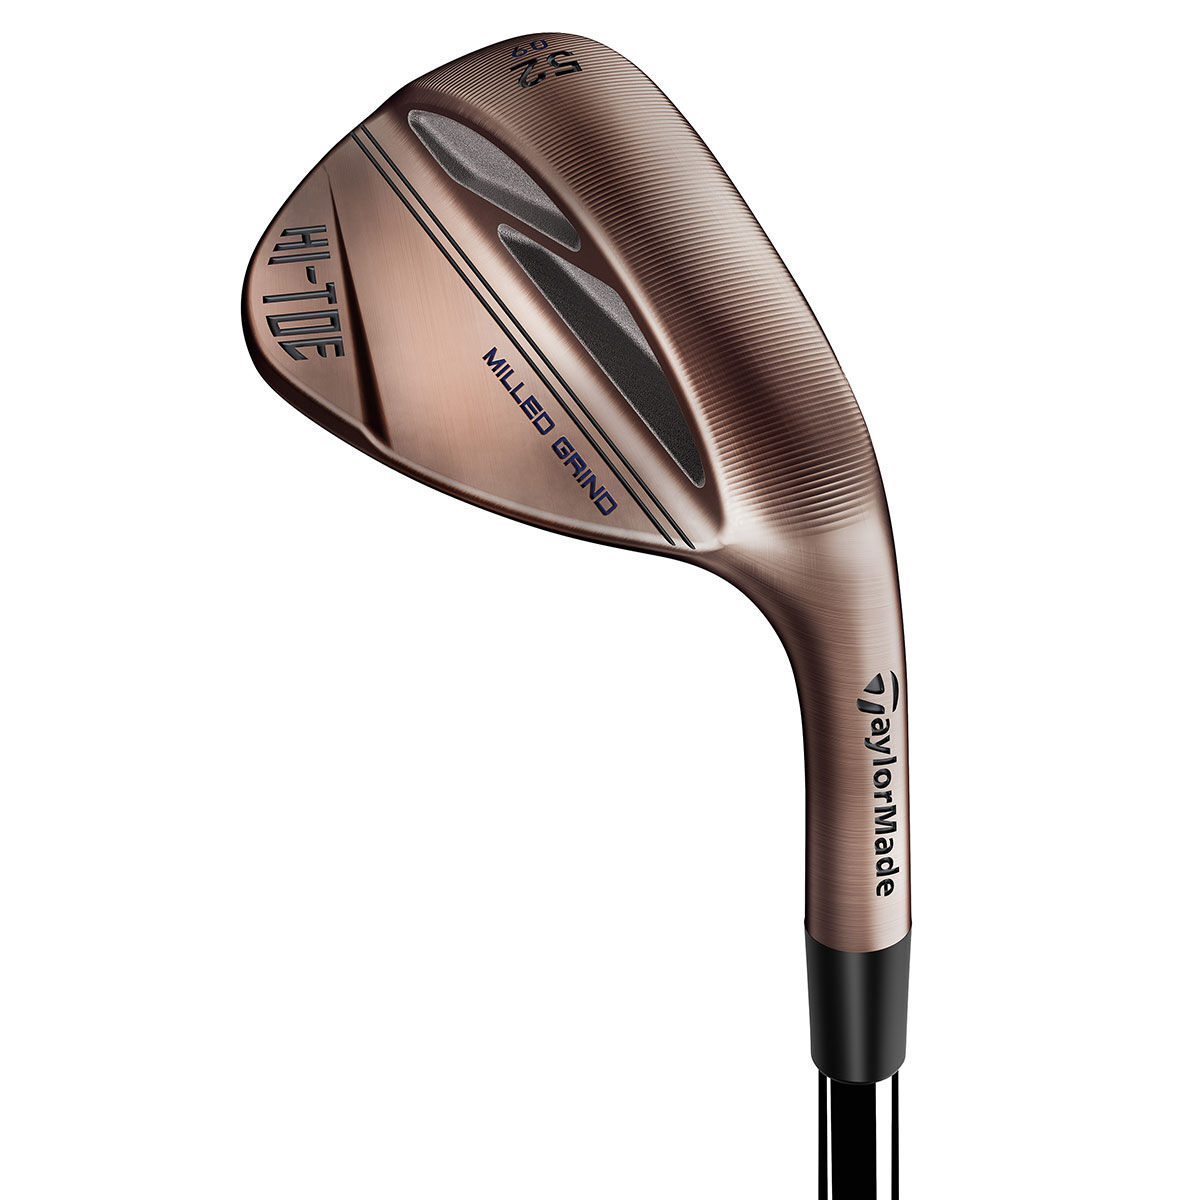 TaylorMade Brown Hi-Toe 3 Right Hand Golf Wedge, Size: 56° | American Golf von TaylorMade